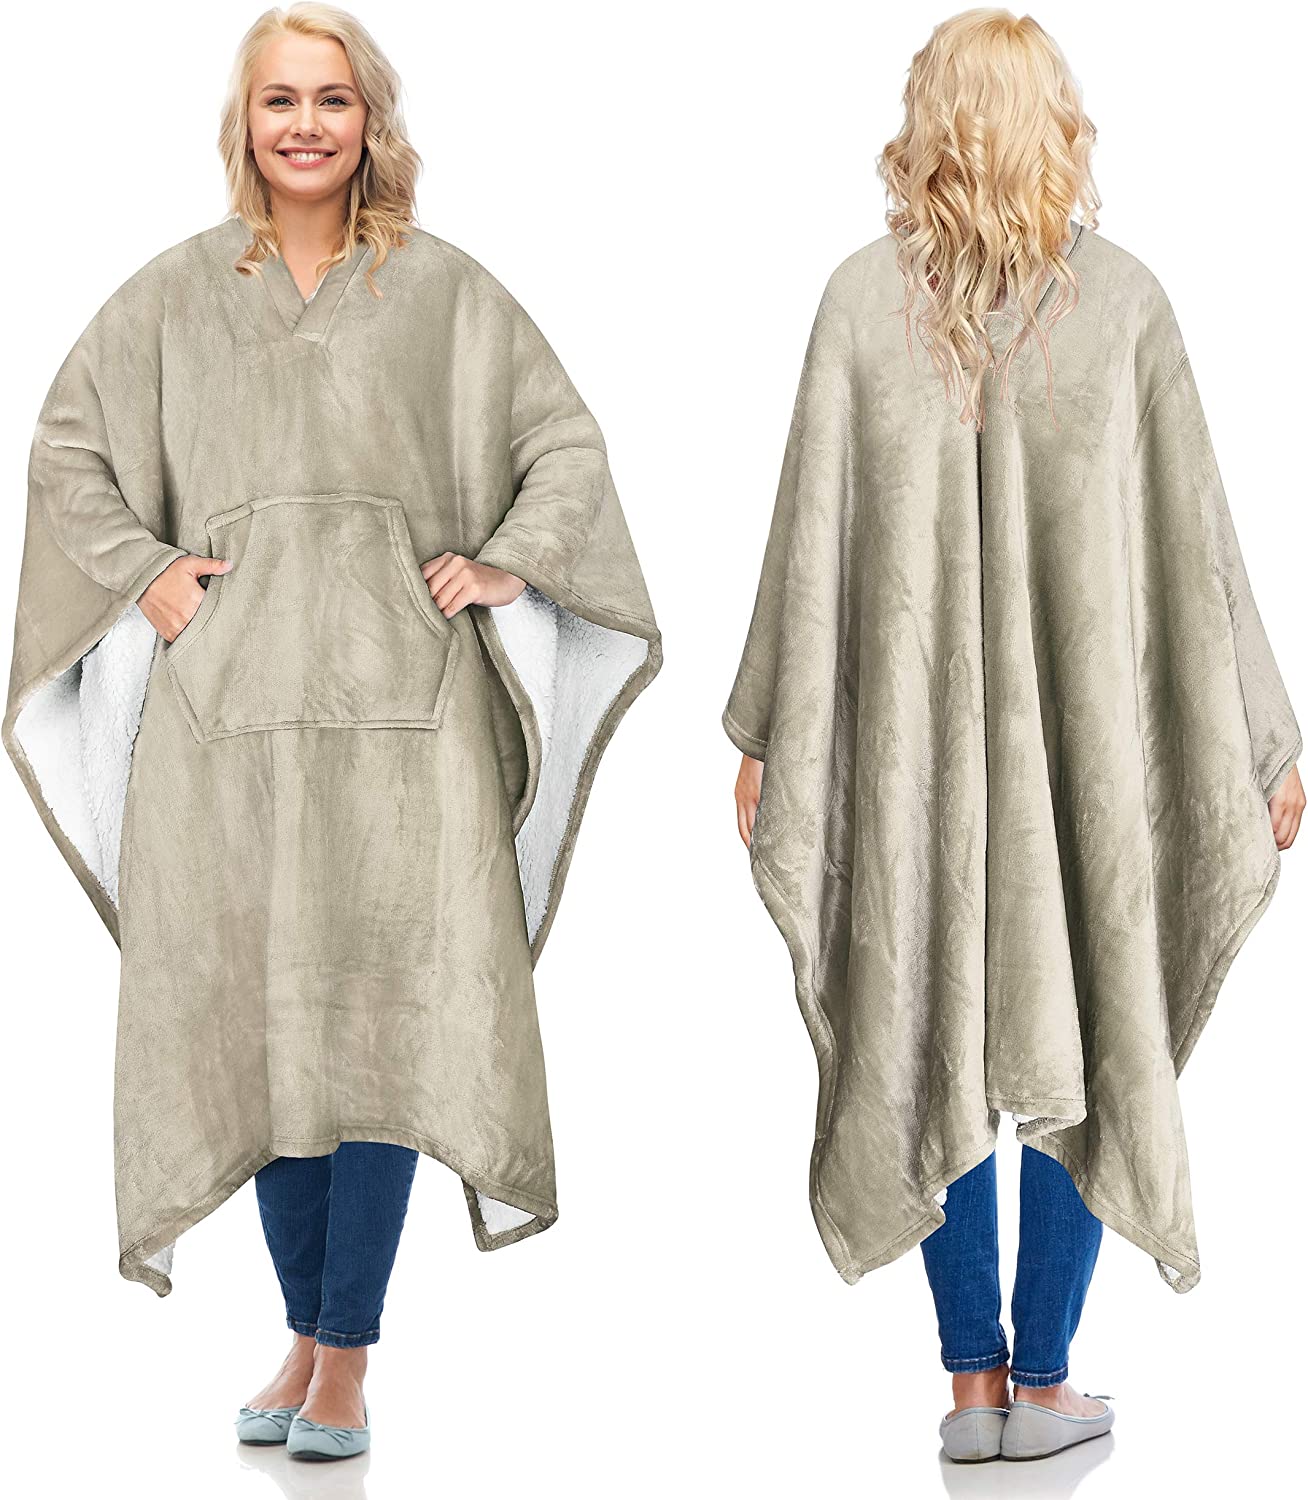 Catalonia Sherpa Wearable Blanket Poncho for Adult Women Men, Wrap Blanket Cape with Pocket, Warm, Soft, Cozy, Snuggly, Comfort Gift, No Sleeves, Camel